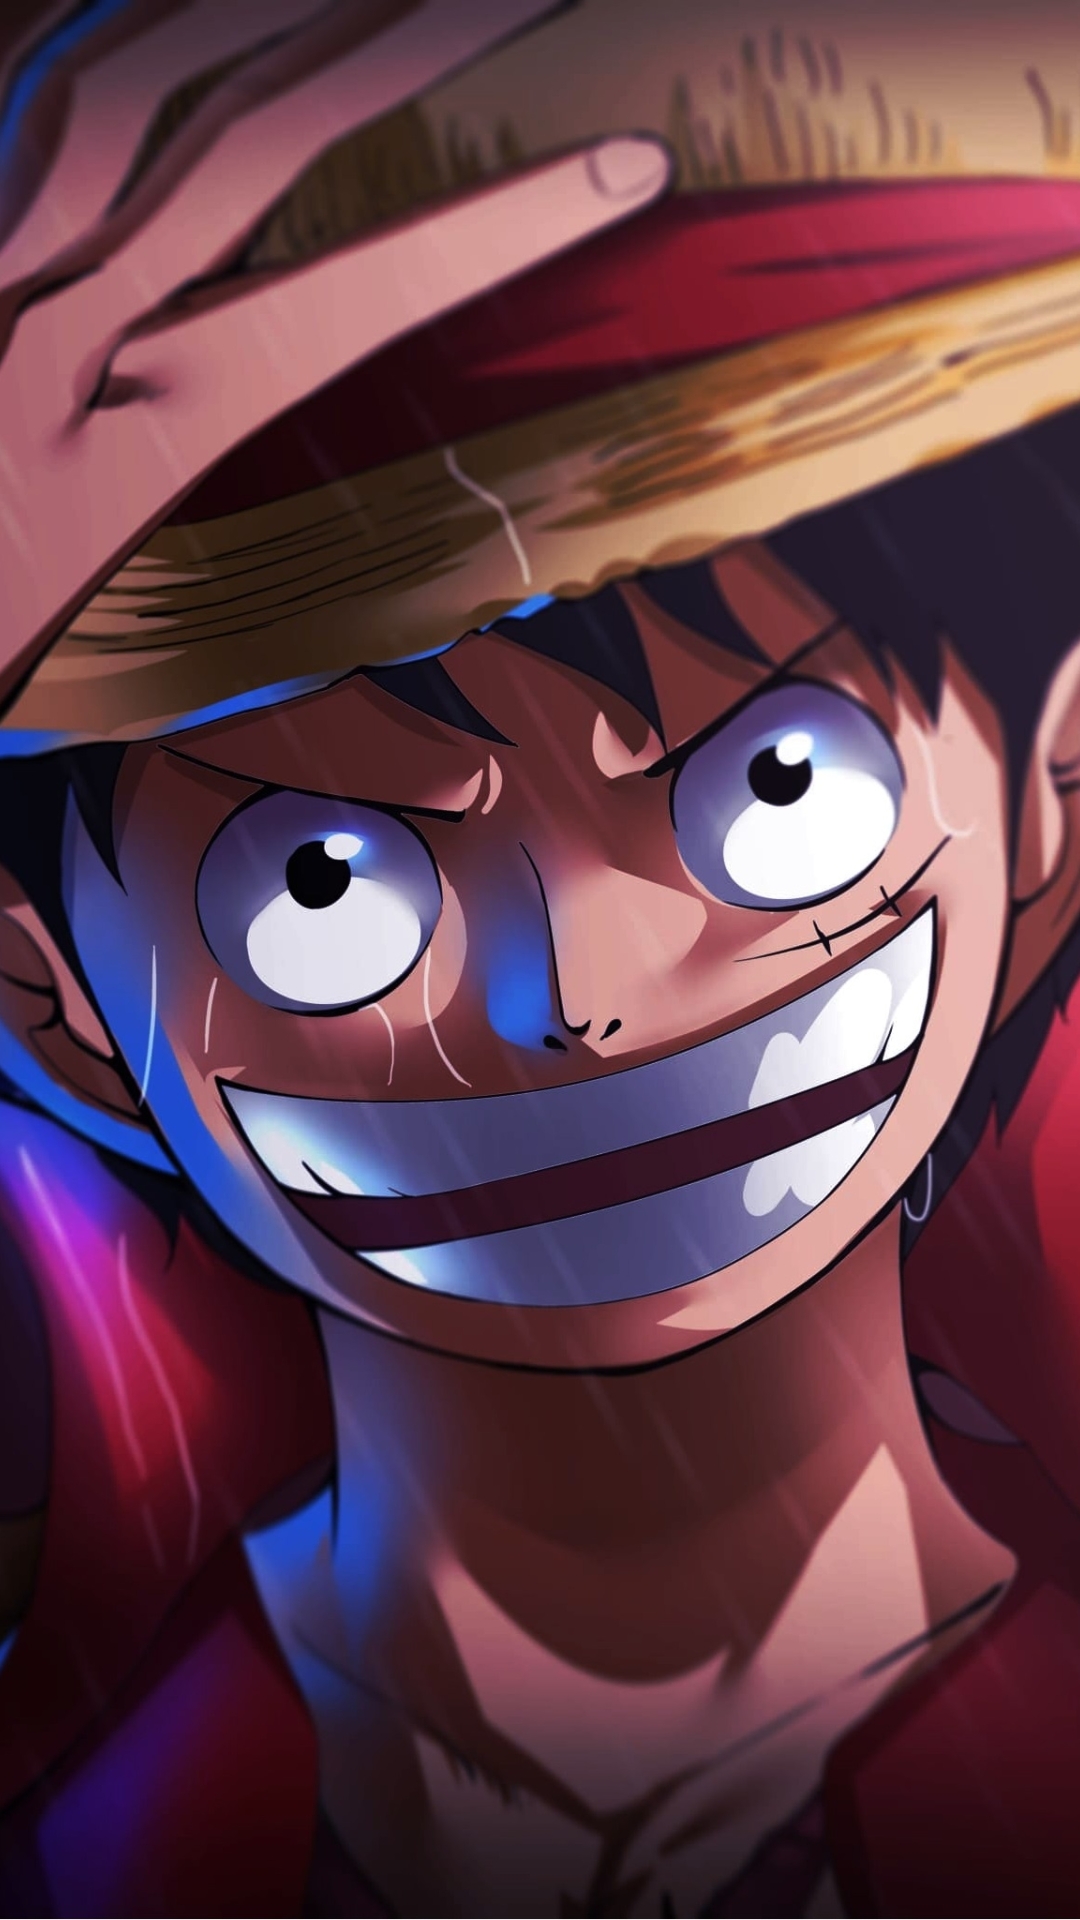 HD wallpaper: Monkey D. Luffy, anime, One Piece, horror, spooky, judgment  Day - Apocalypse | Wallpaper Flare